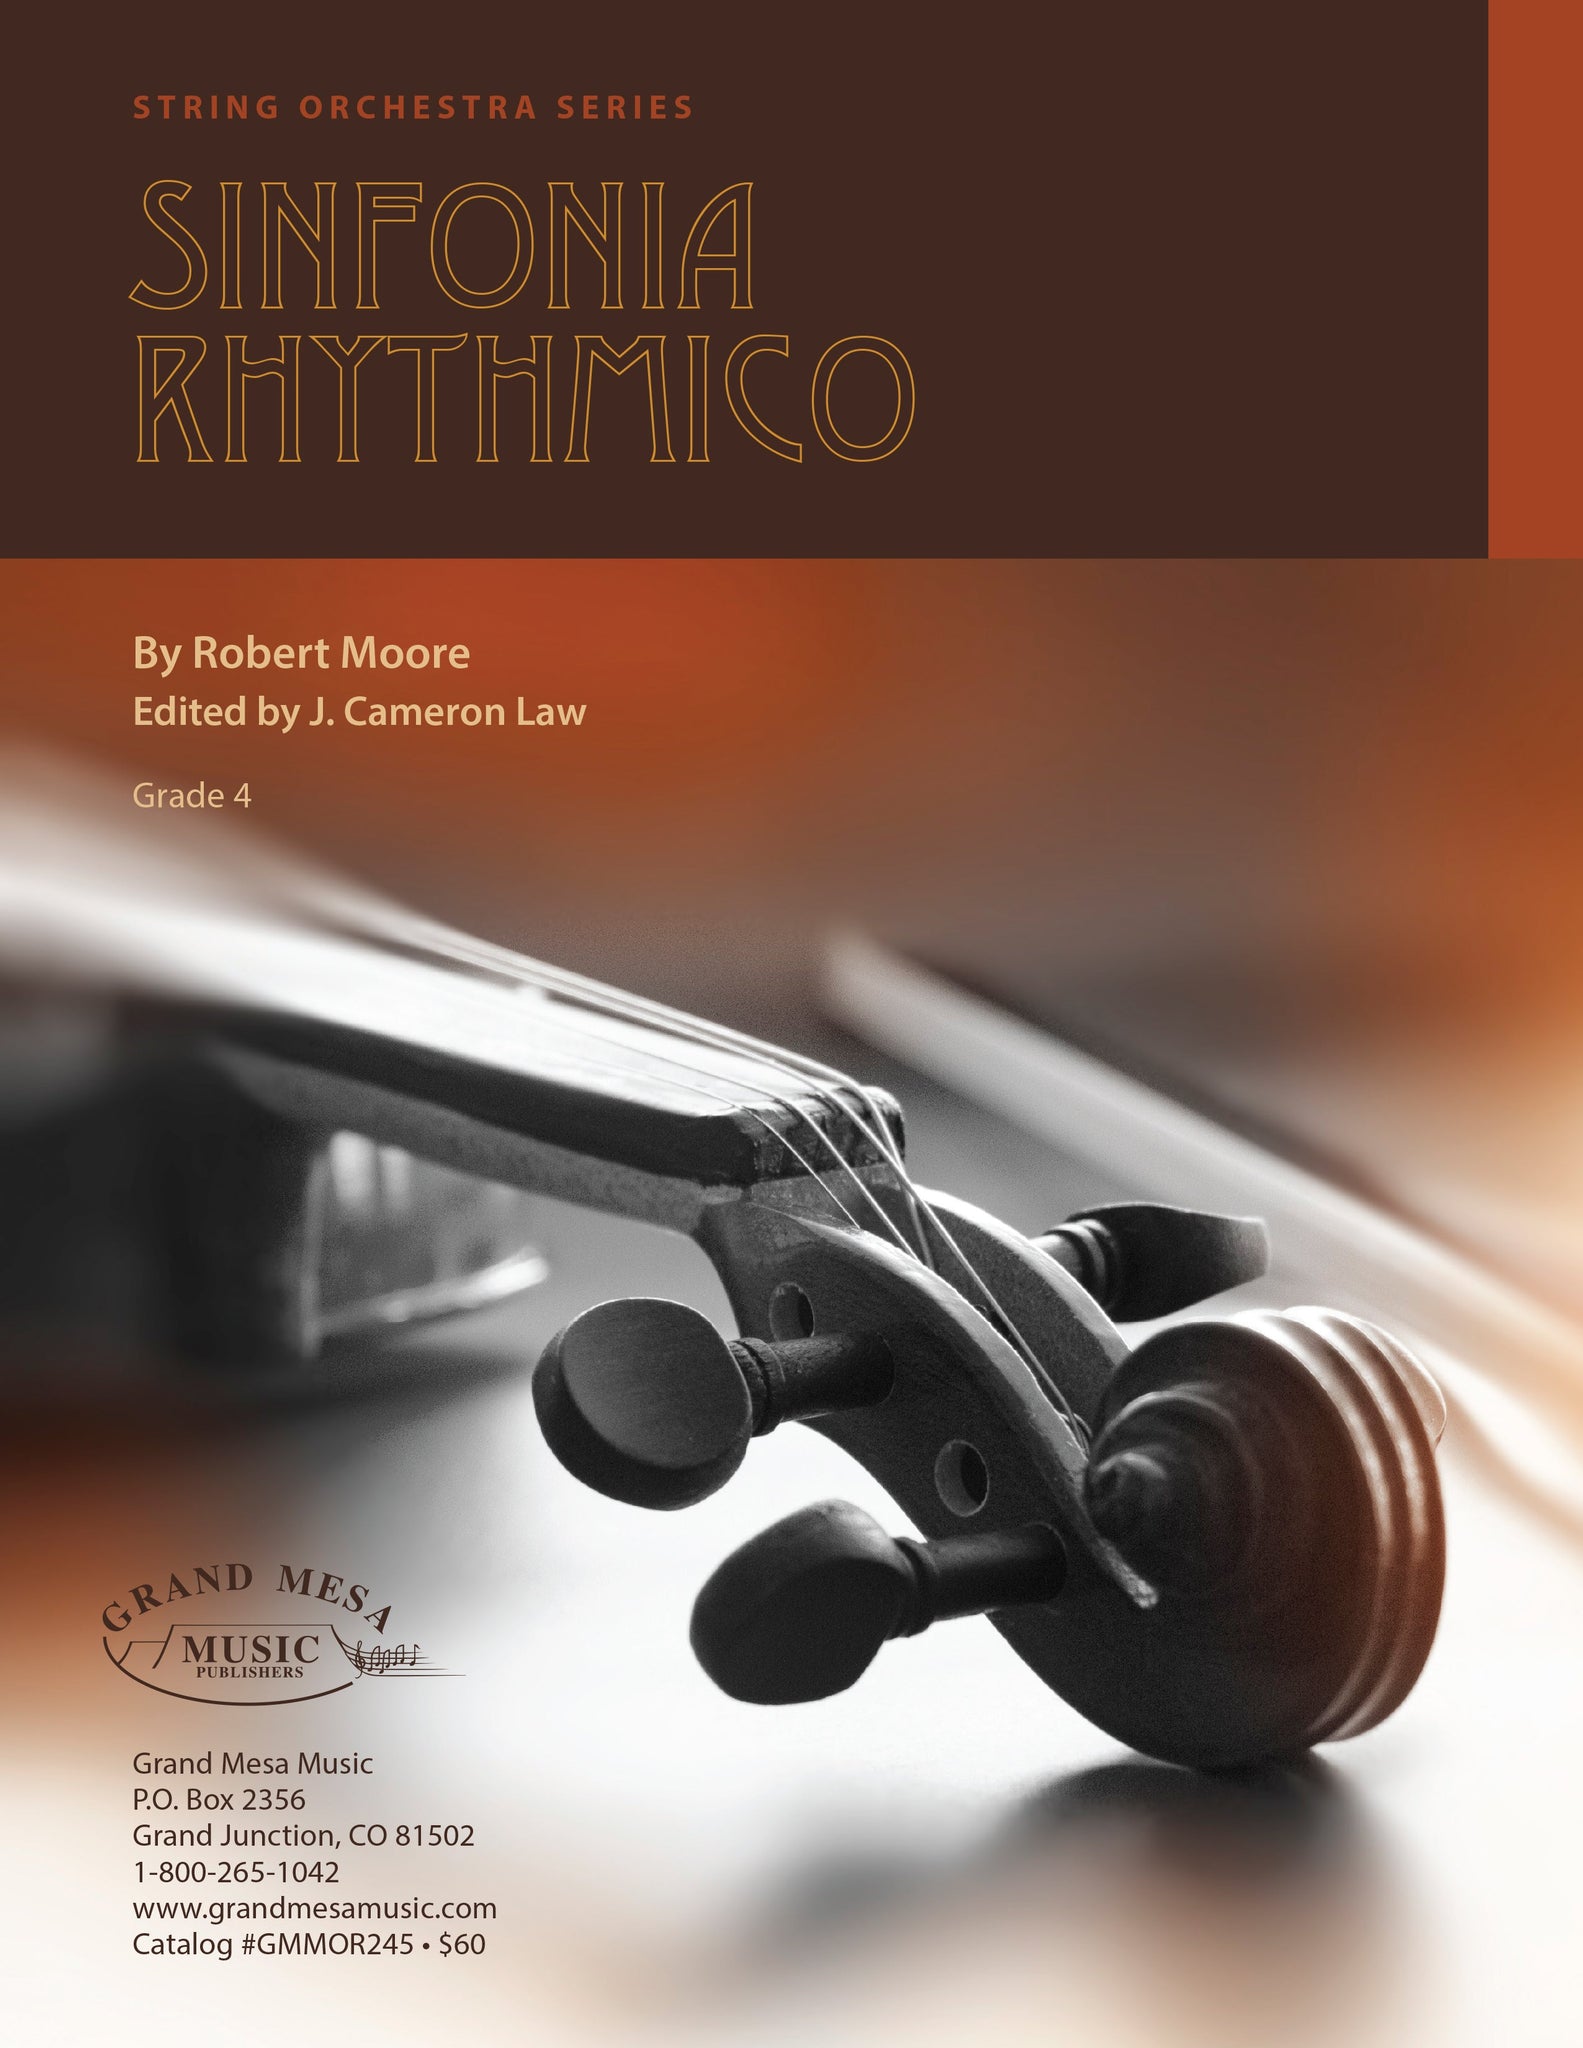 Strings sheet music cover of Sinfonia Rhythmico, composed by Robert Moore.